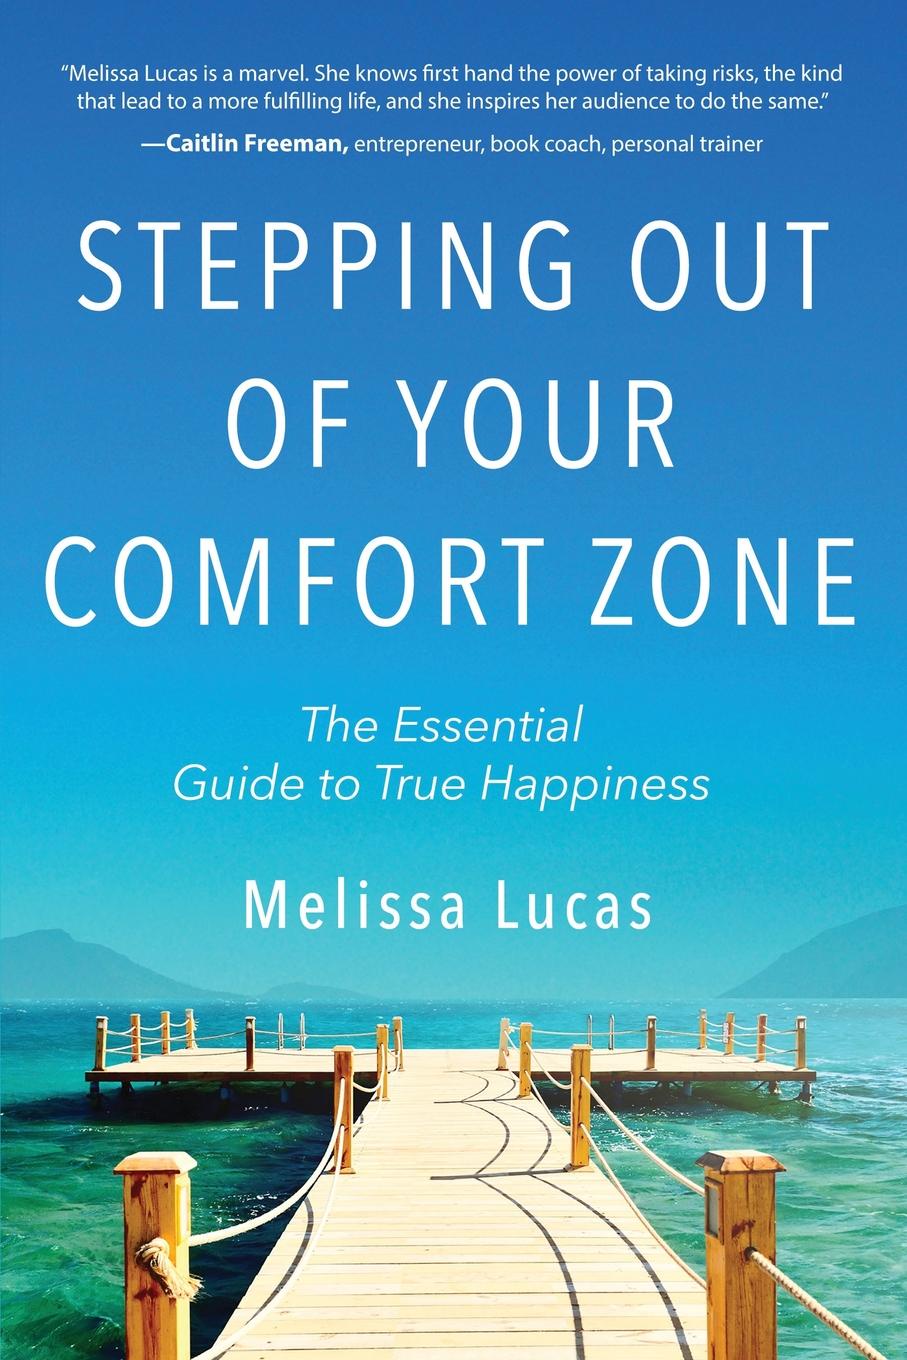 Stepping Out of Your Comfort Zone. The Essential Guide to True Happiness